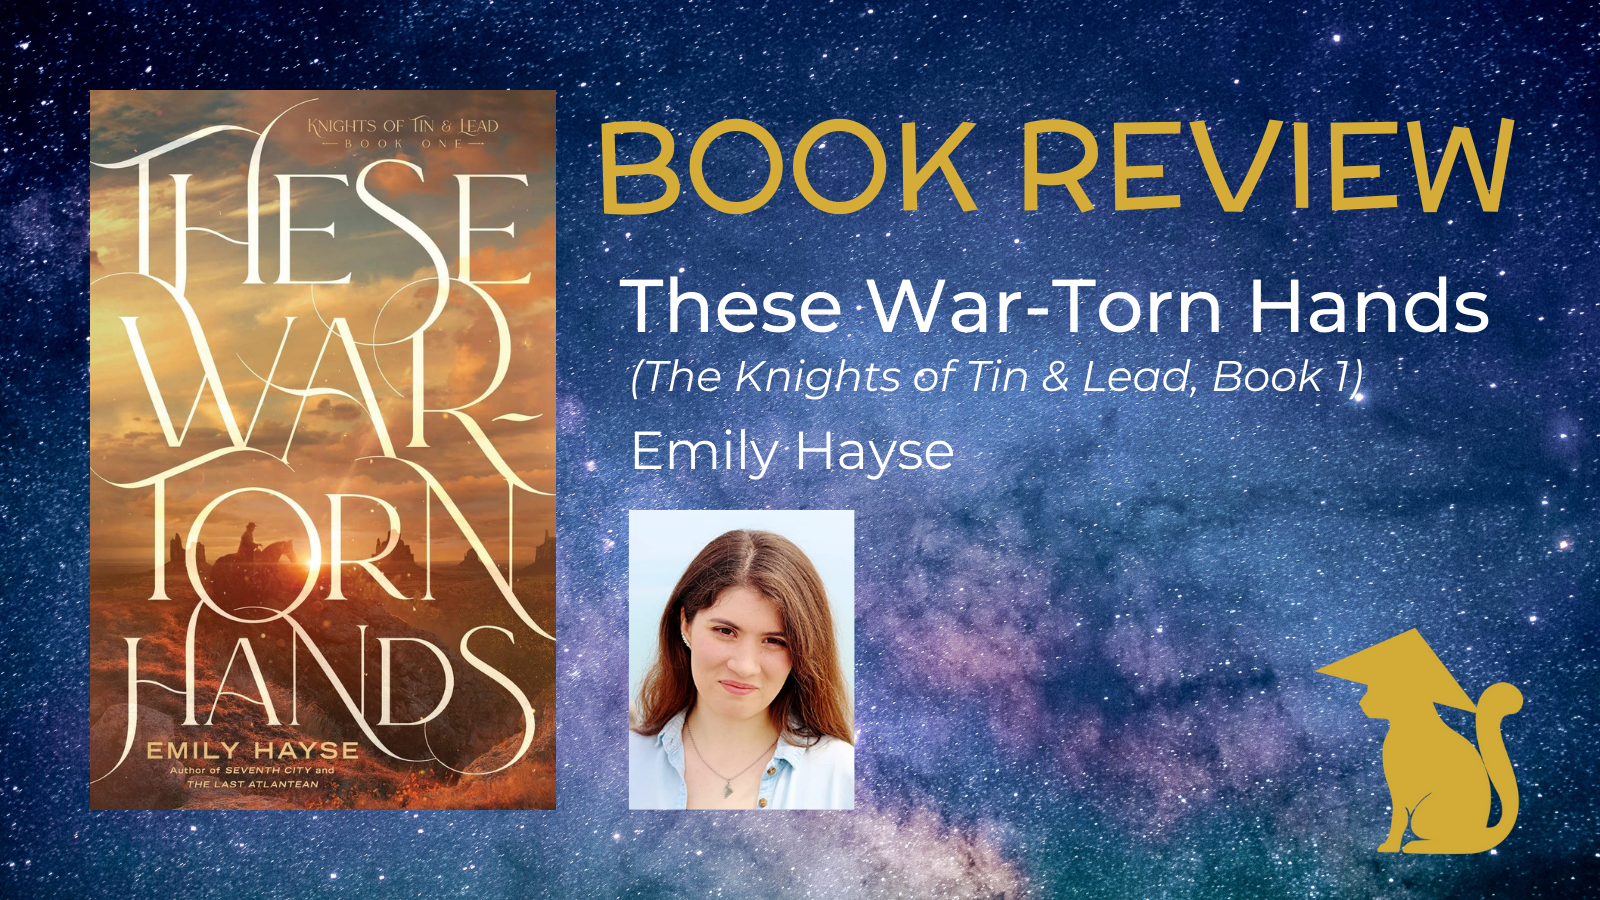 You are currently viewing These War-Torn Hands by Emily Hayse